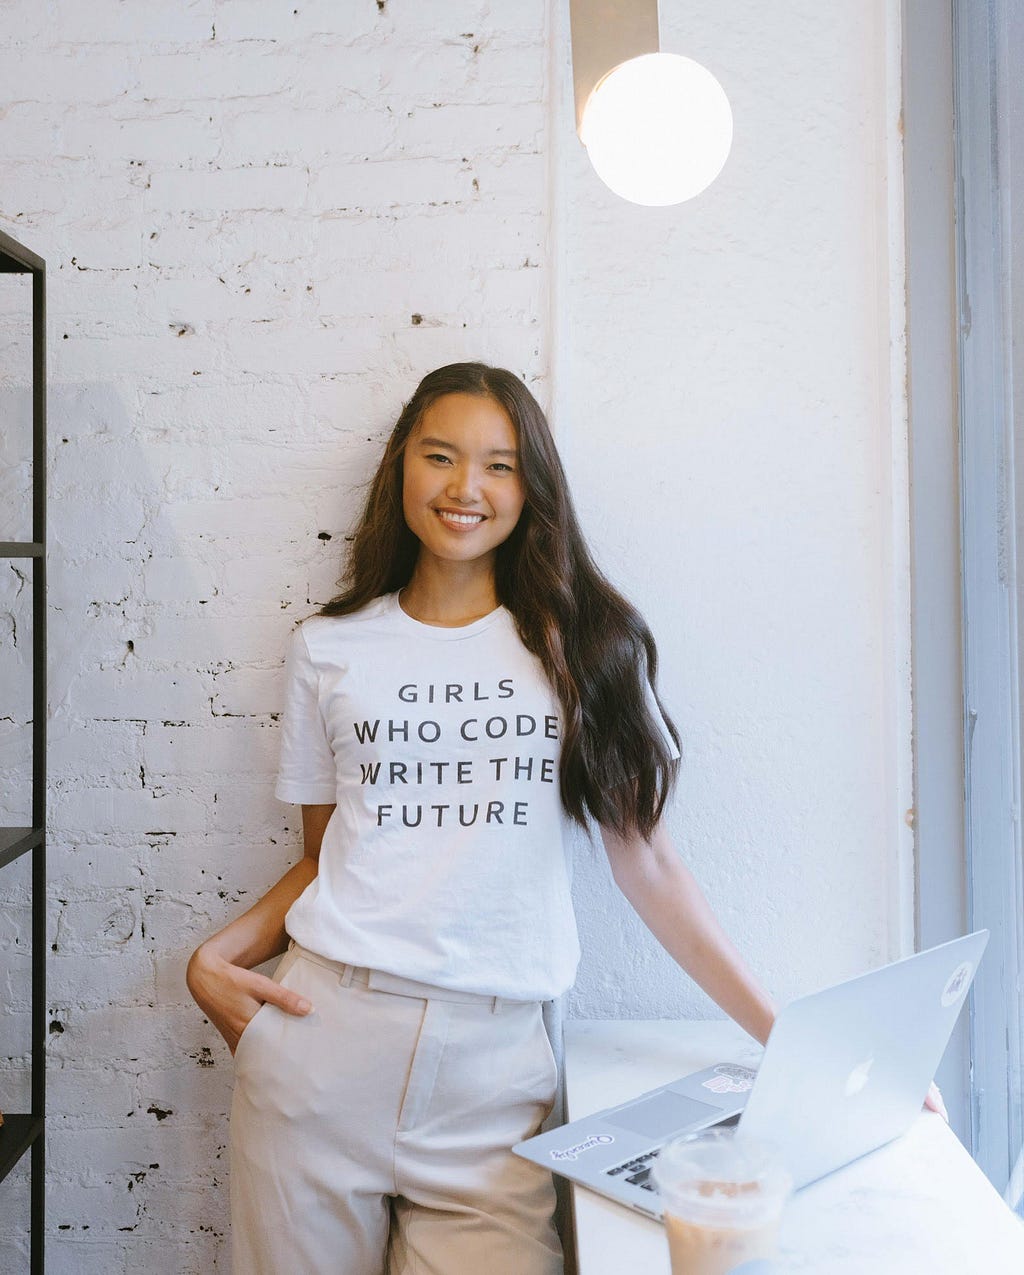 This picture features Marizza wearing a white t-shirt which says — “Girls who code write the future”